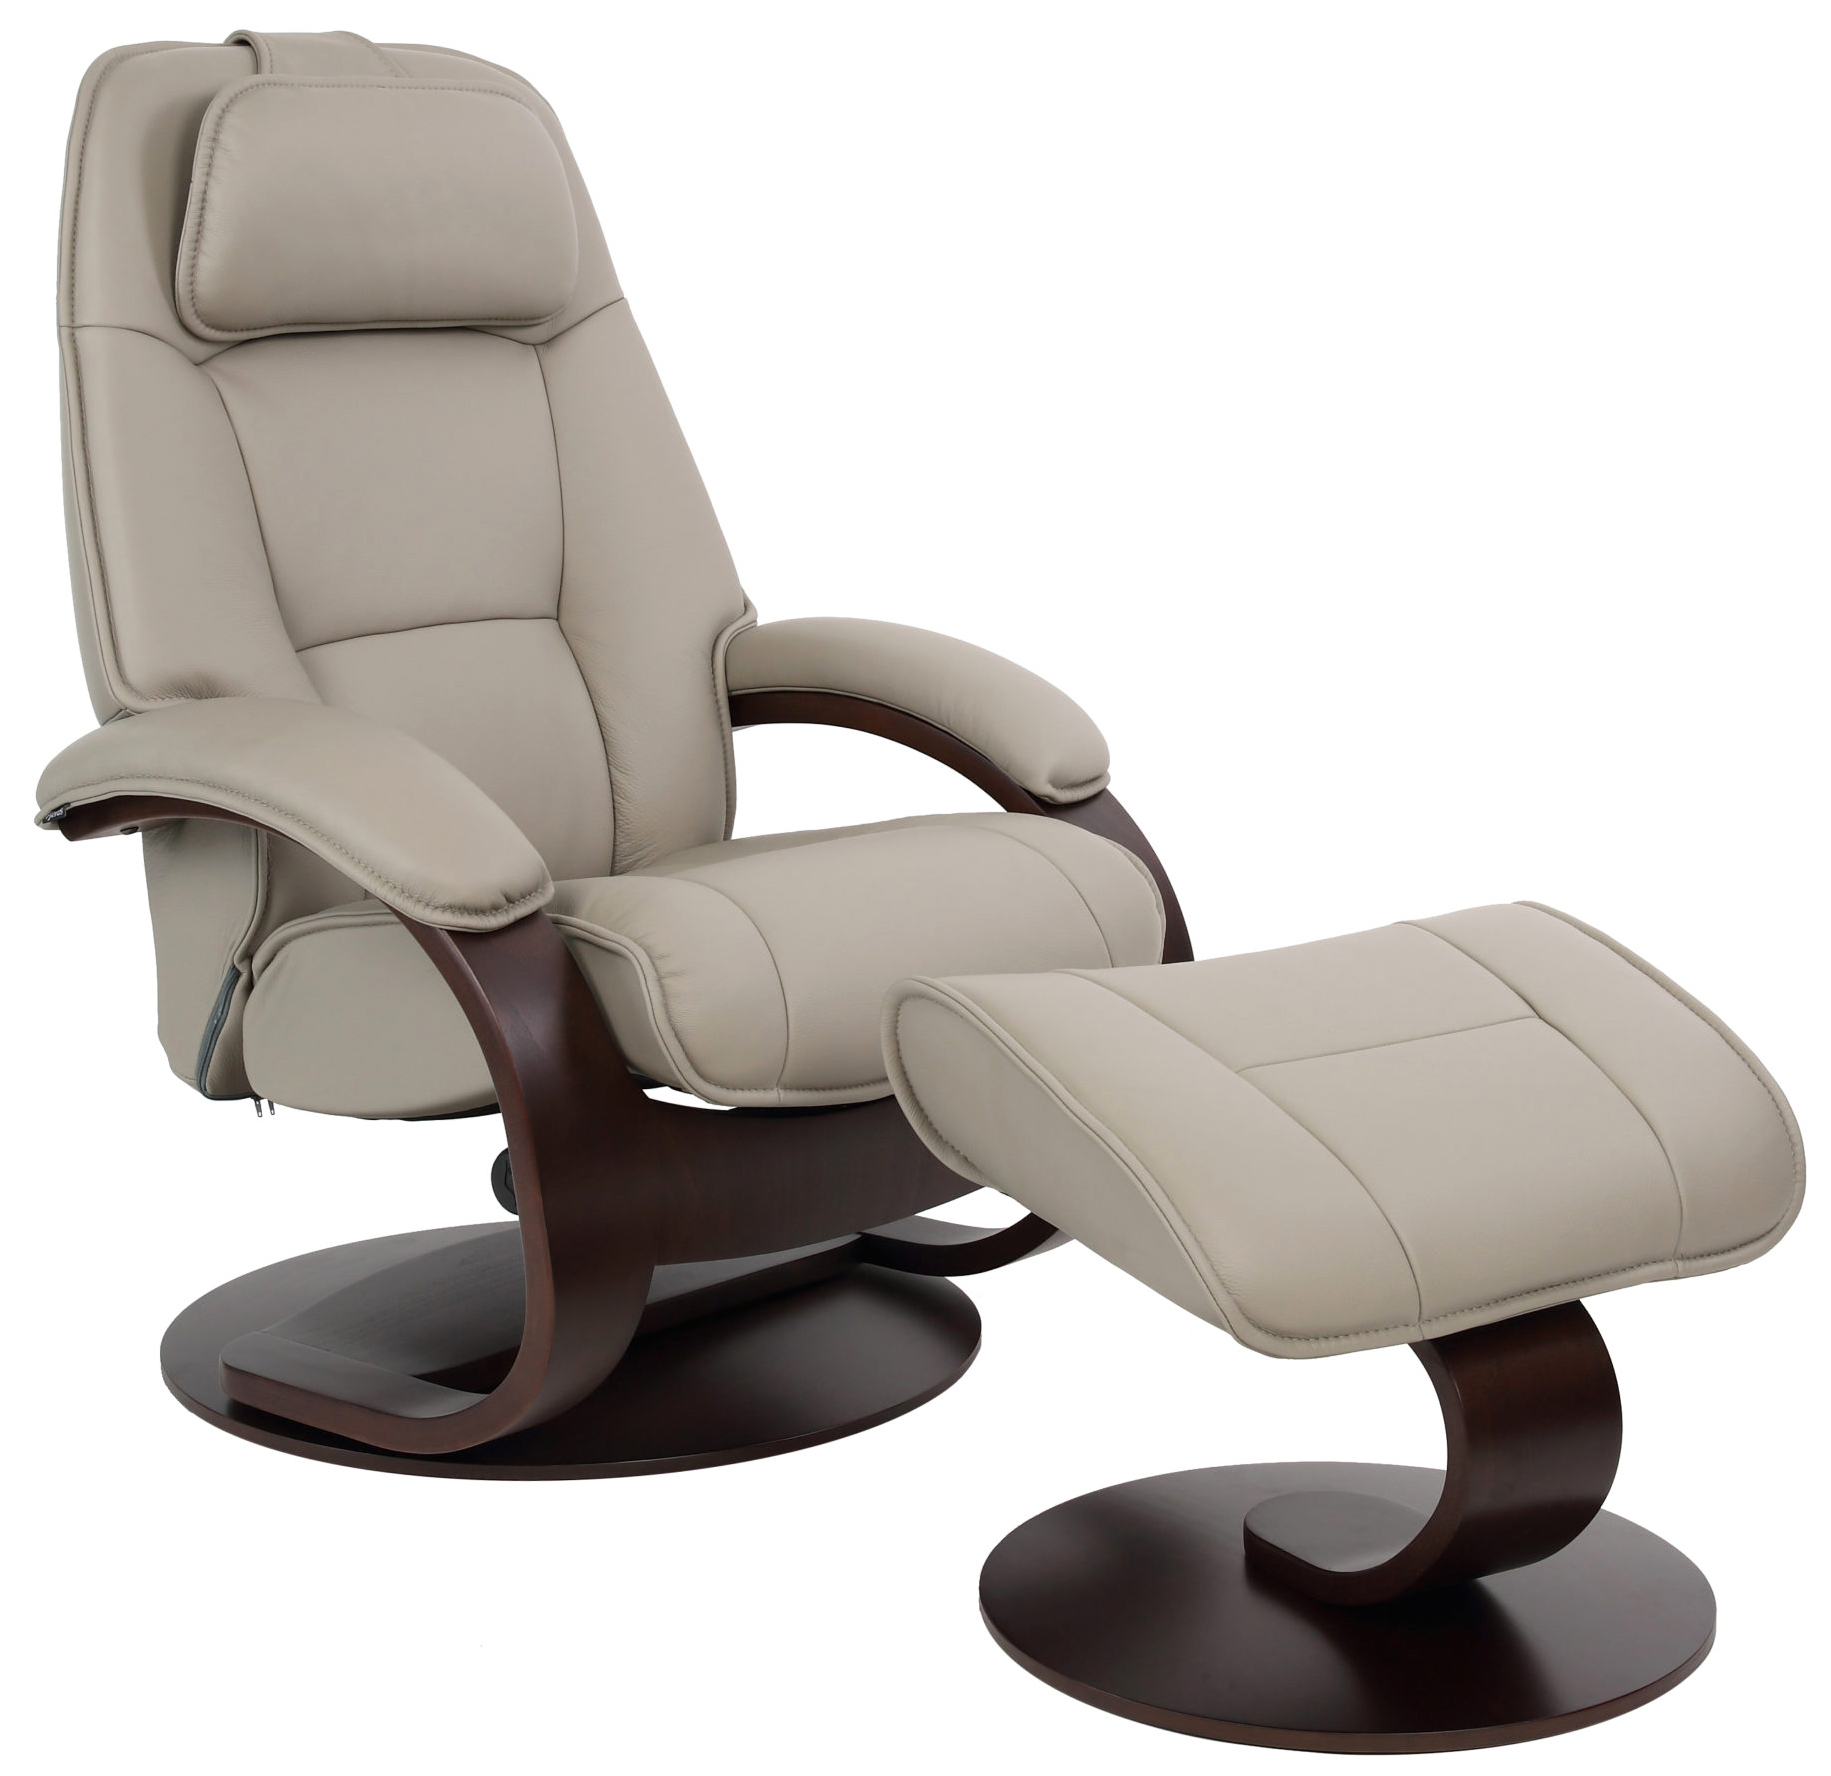 Fjords Admiral Ergonomic Leather, Scandinavian Leather Recliner Chairs